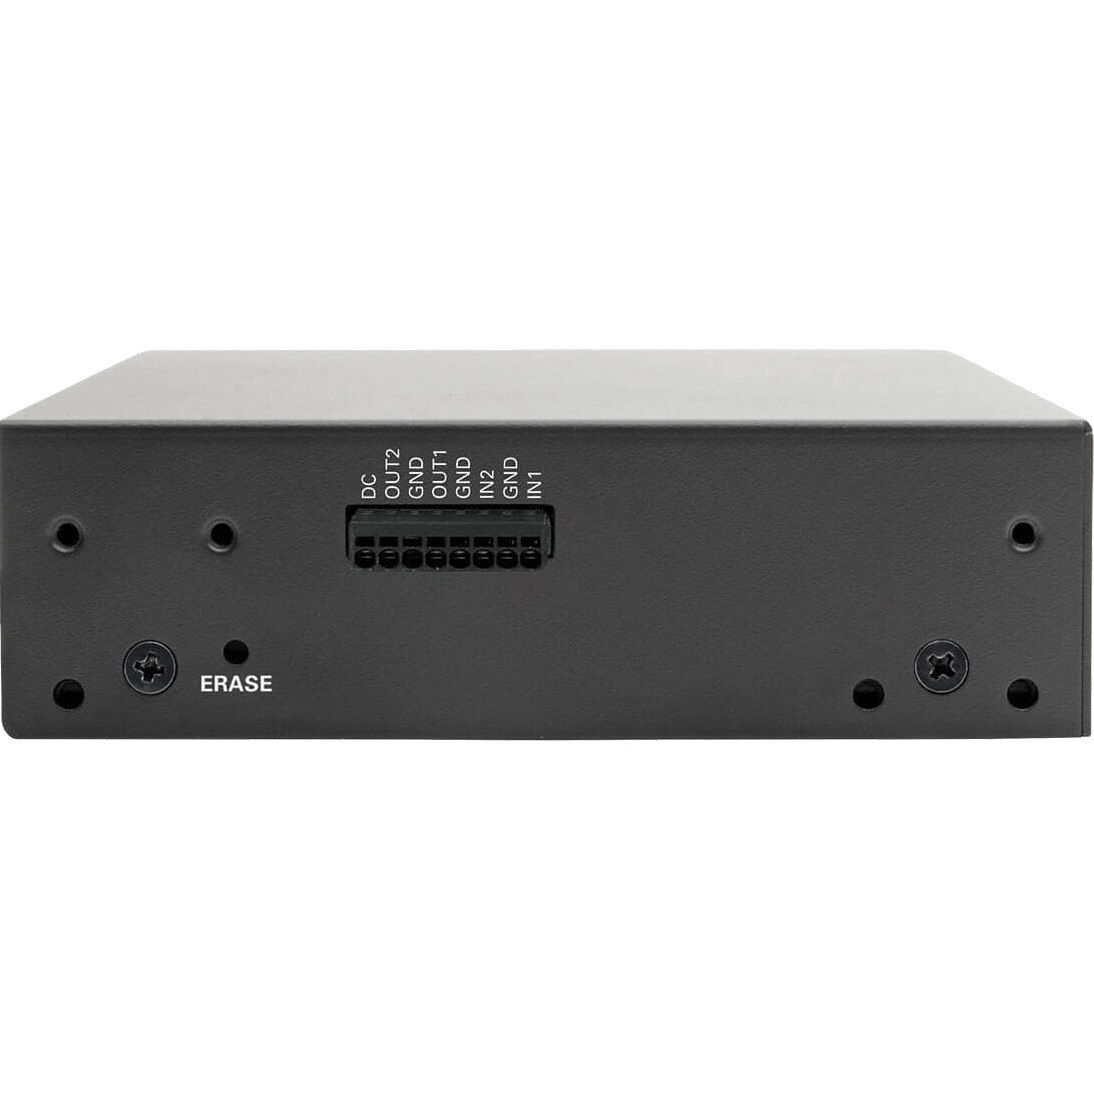 Tripp Lite by Eaton 8-Port Console Server with Dual GbE NIC, 4Gb Flash and 4 USB Ports